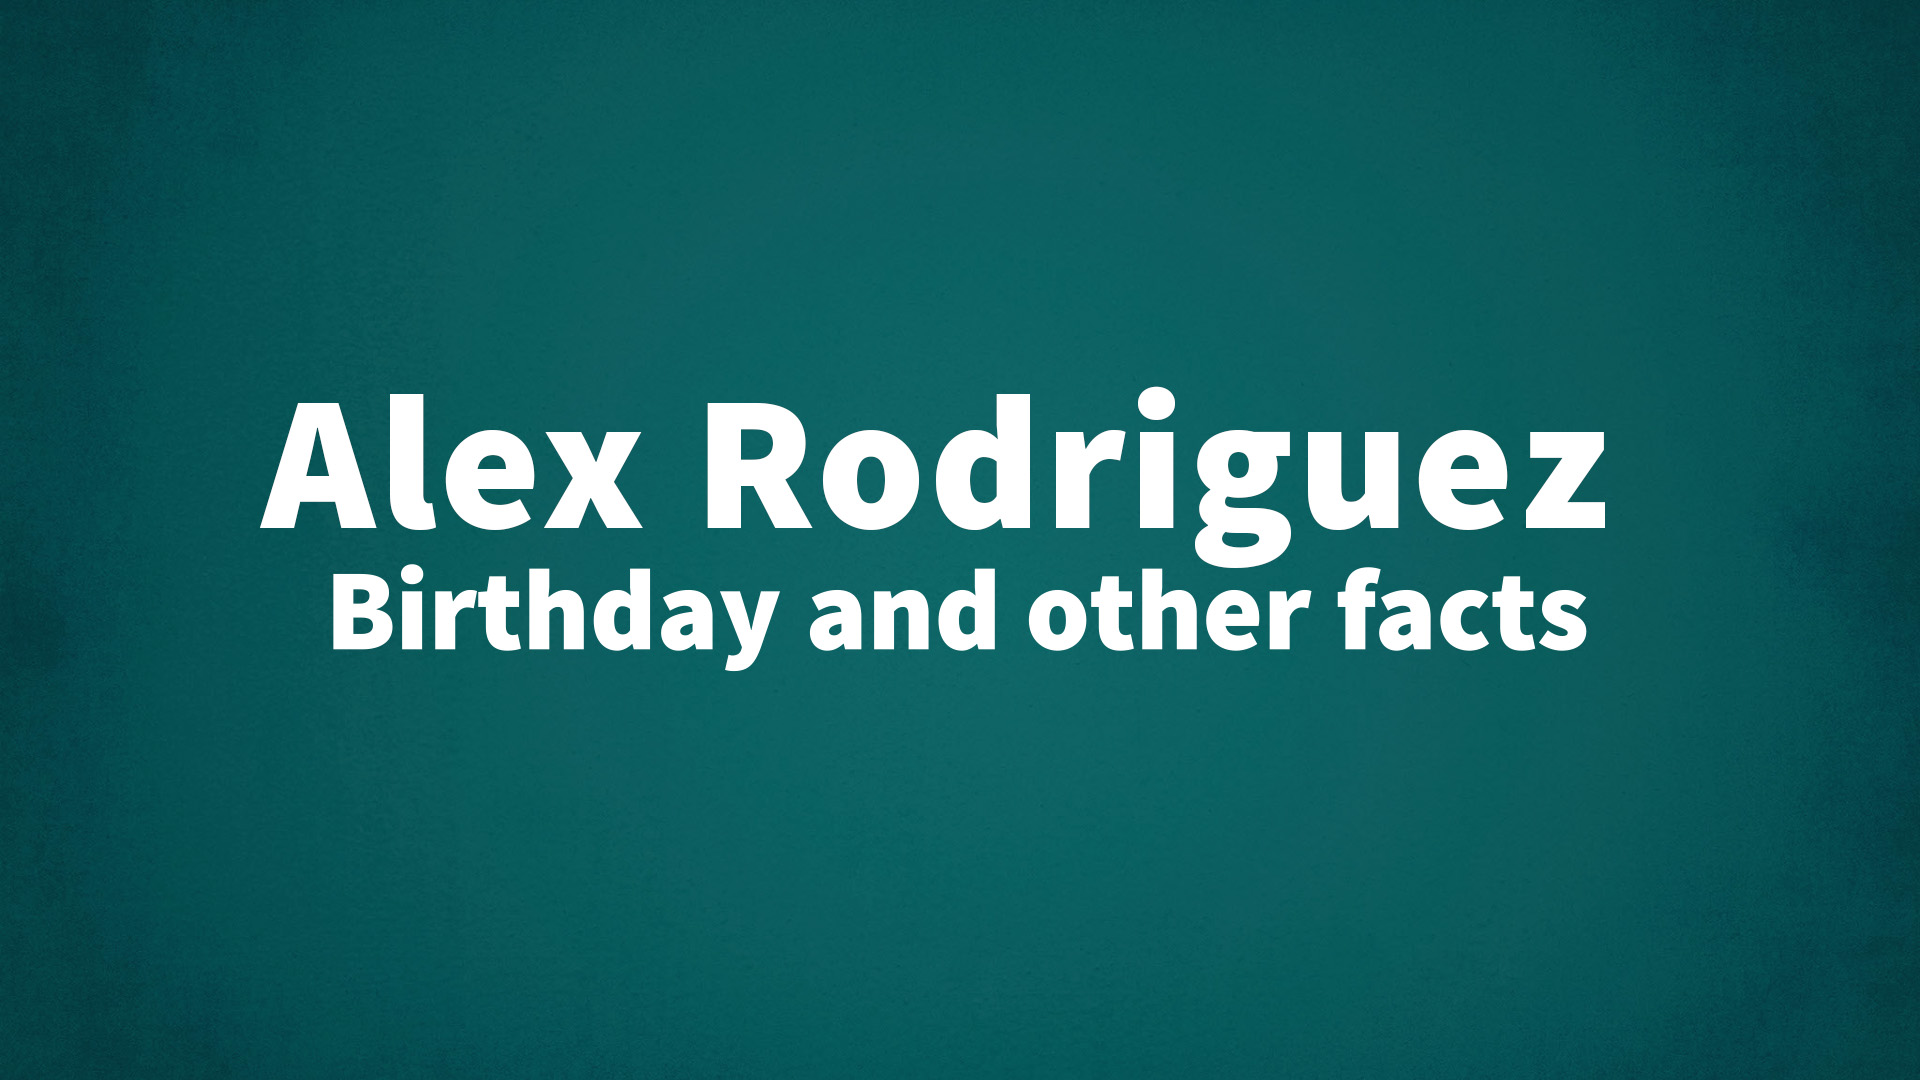 Alex Rodriguez Birthday and other facts